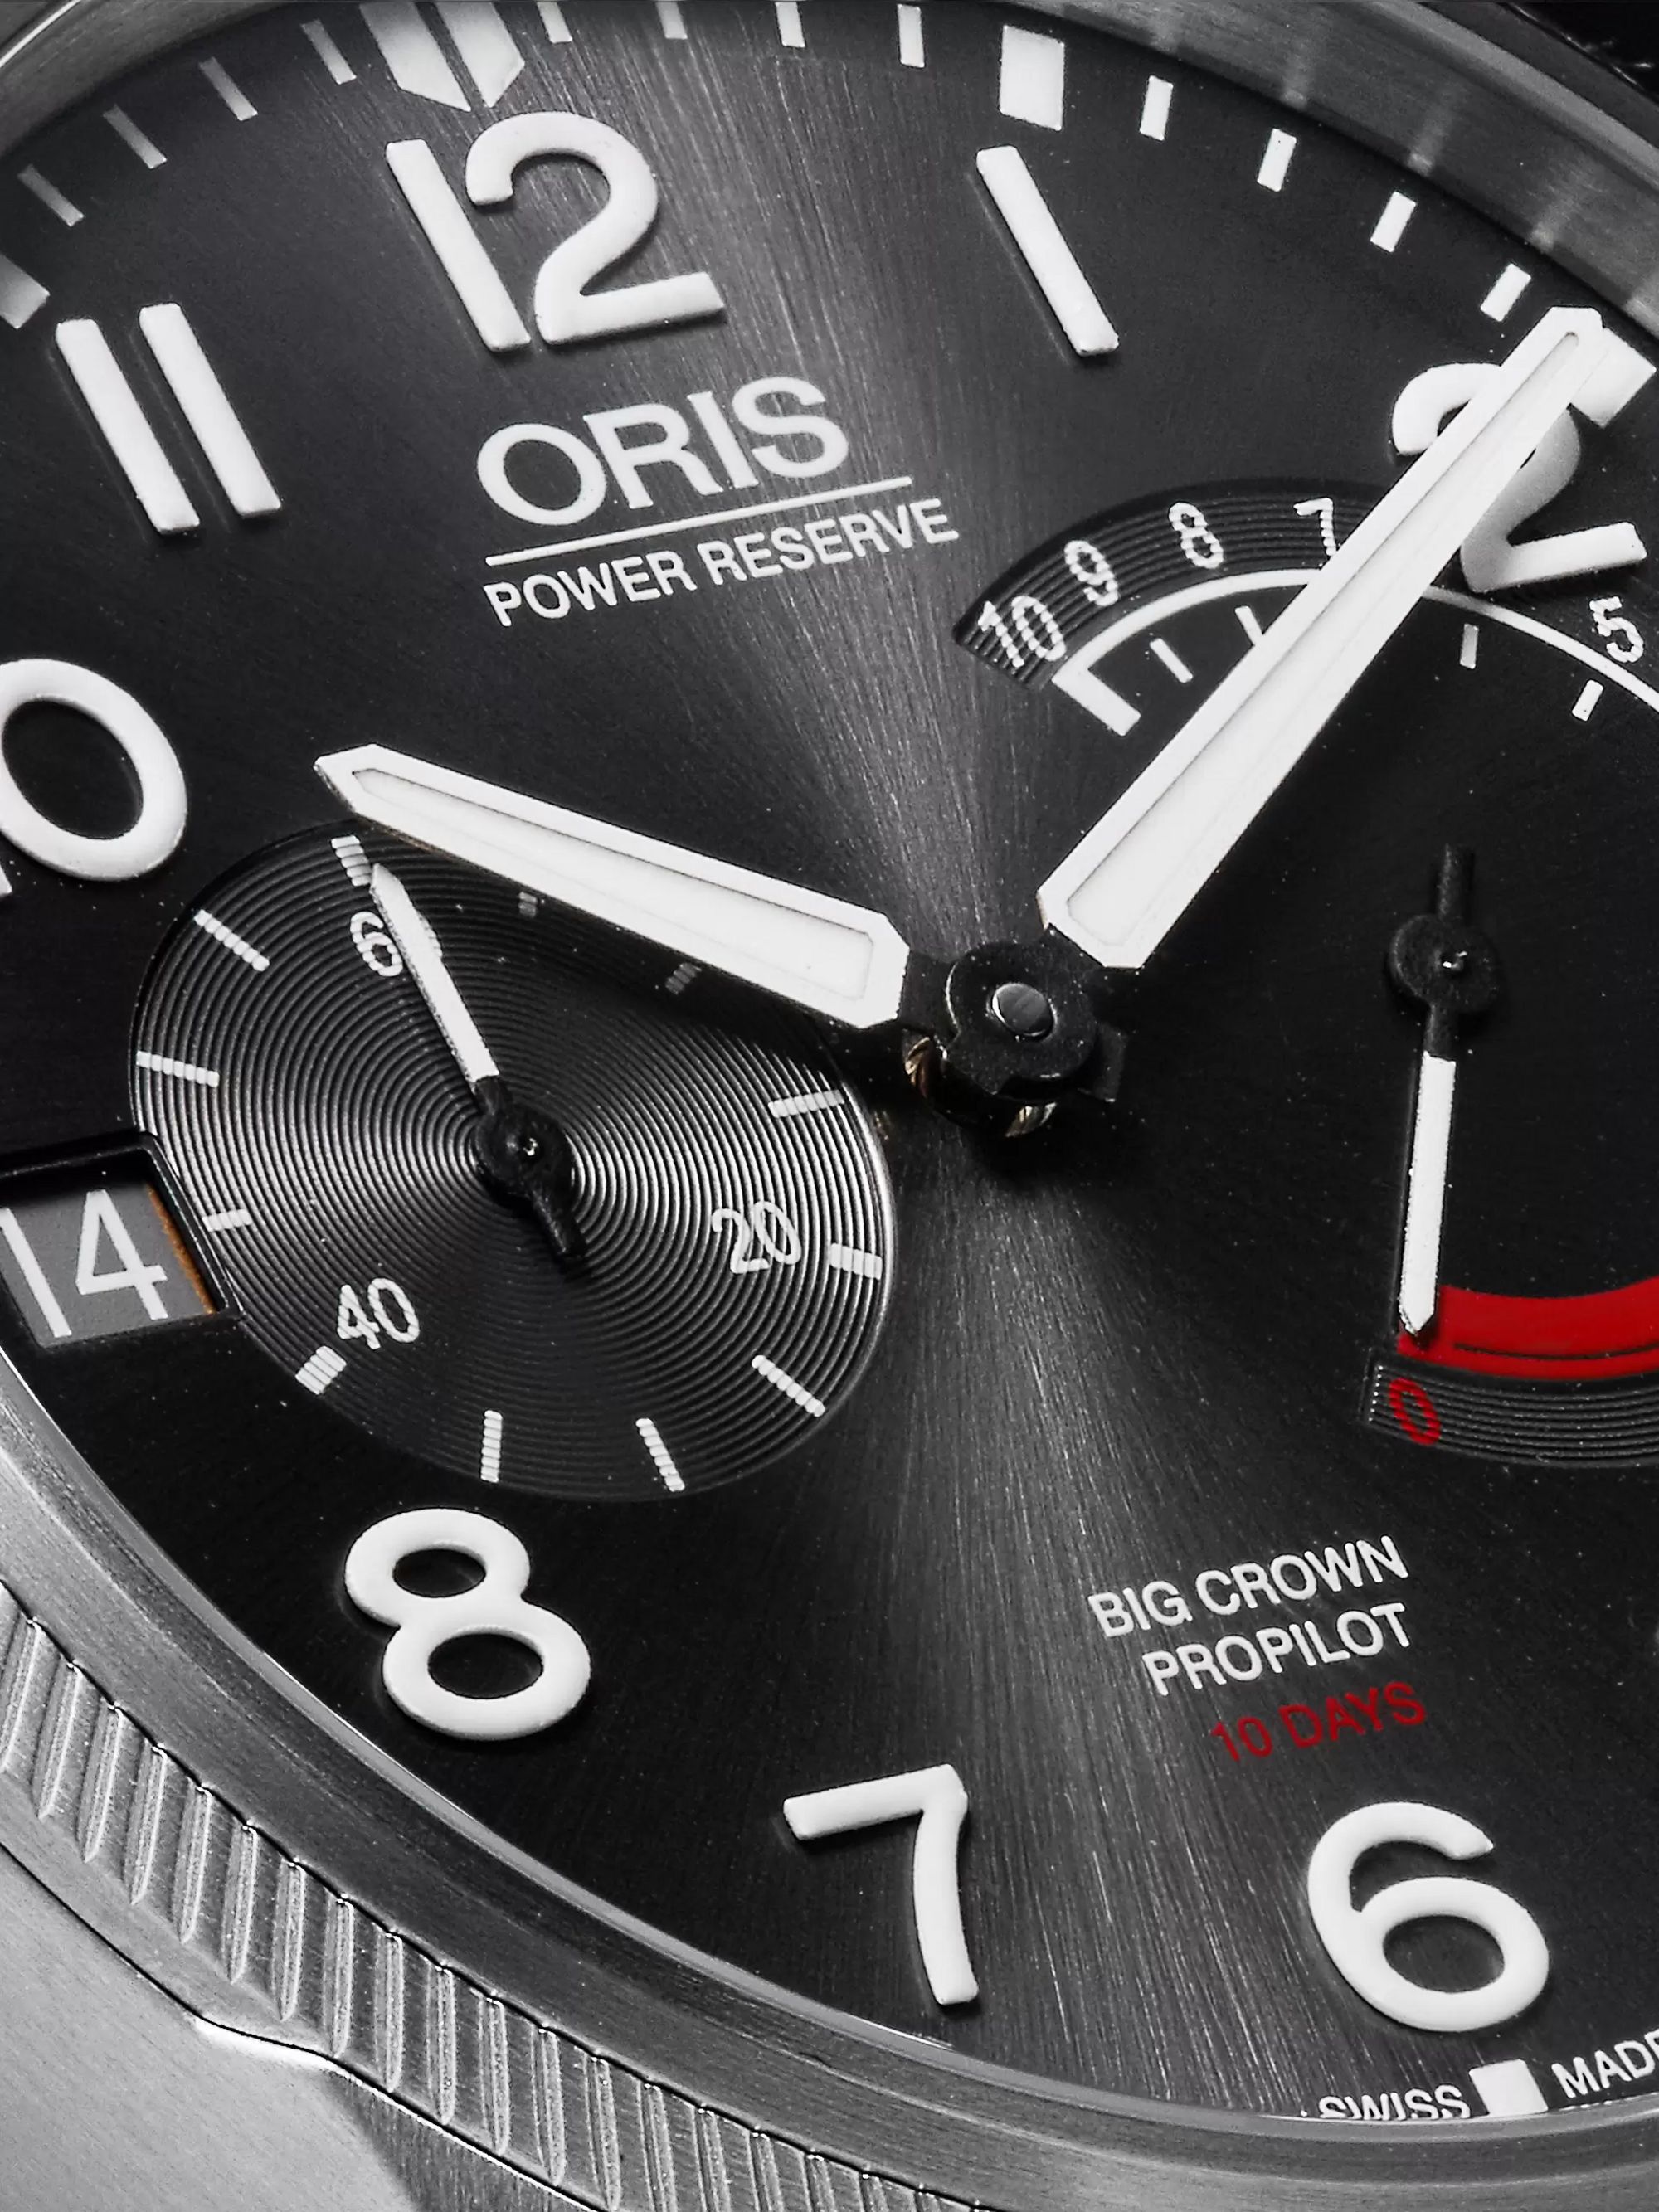 ORIS ProPilot Calibre 111 44mm Stainless Steel and Alligator Watch, Ref. No. 111 7711 4163 12272FC